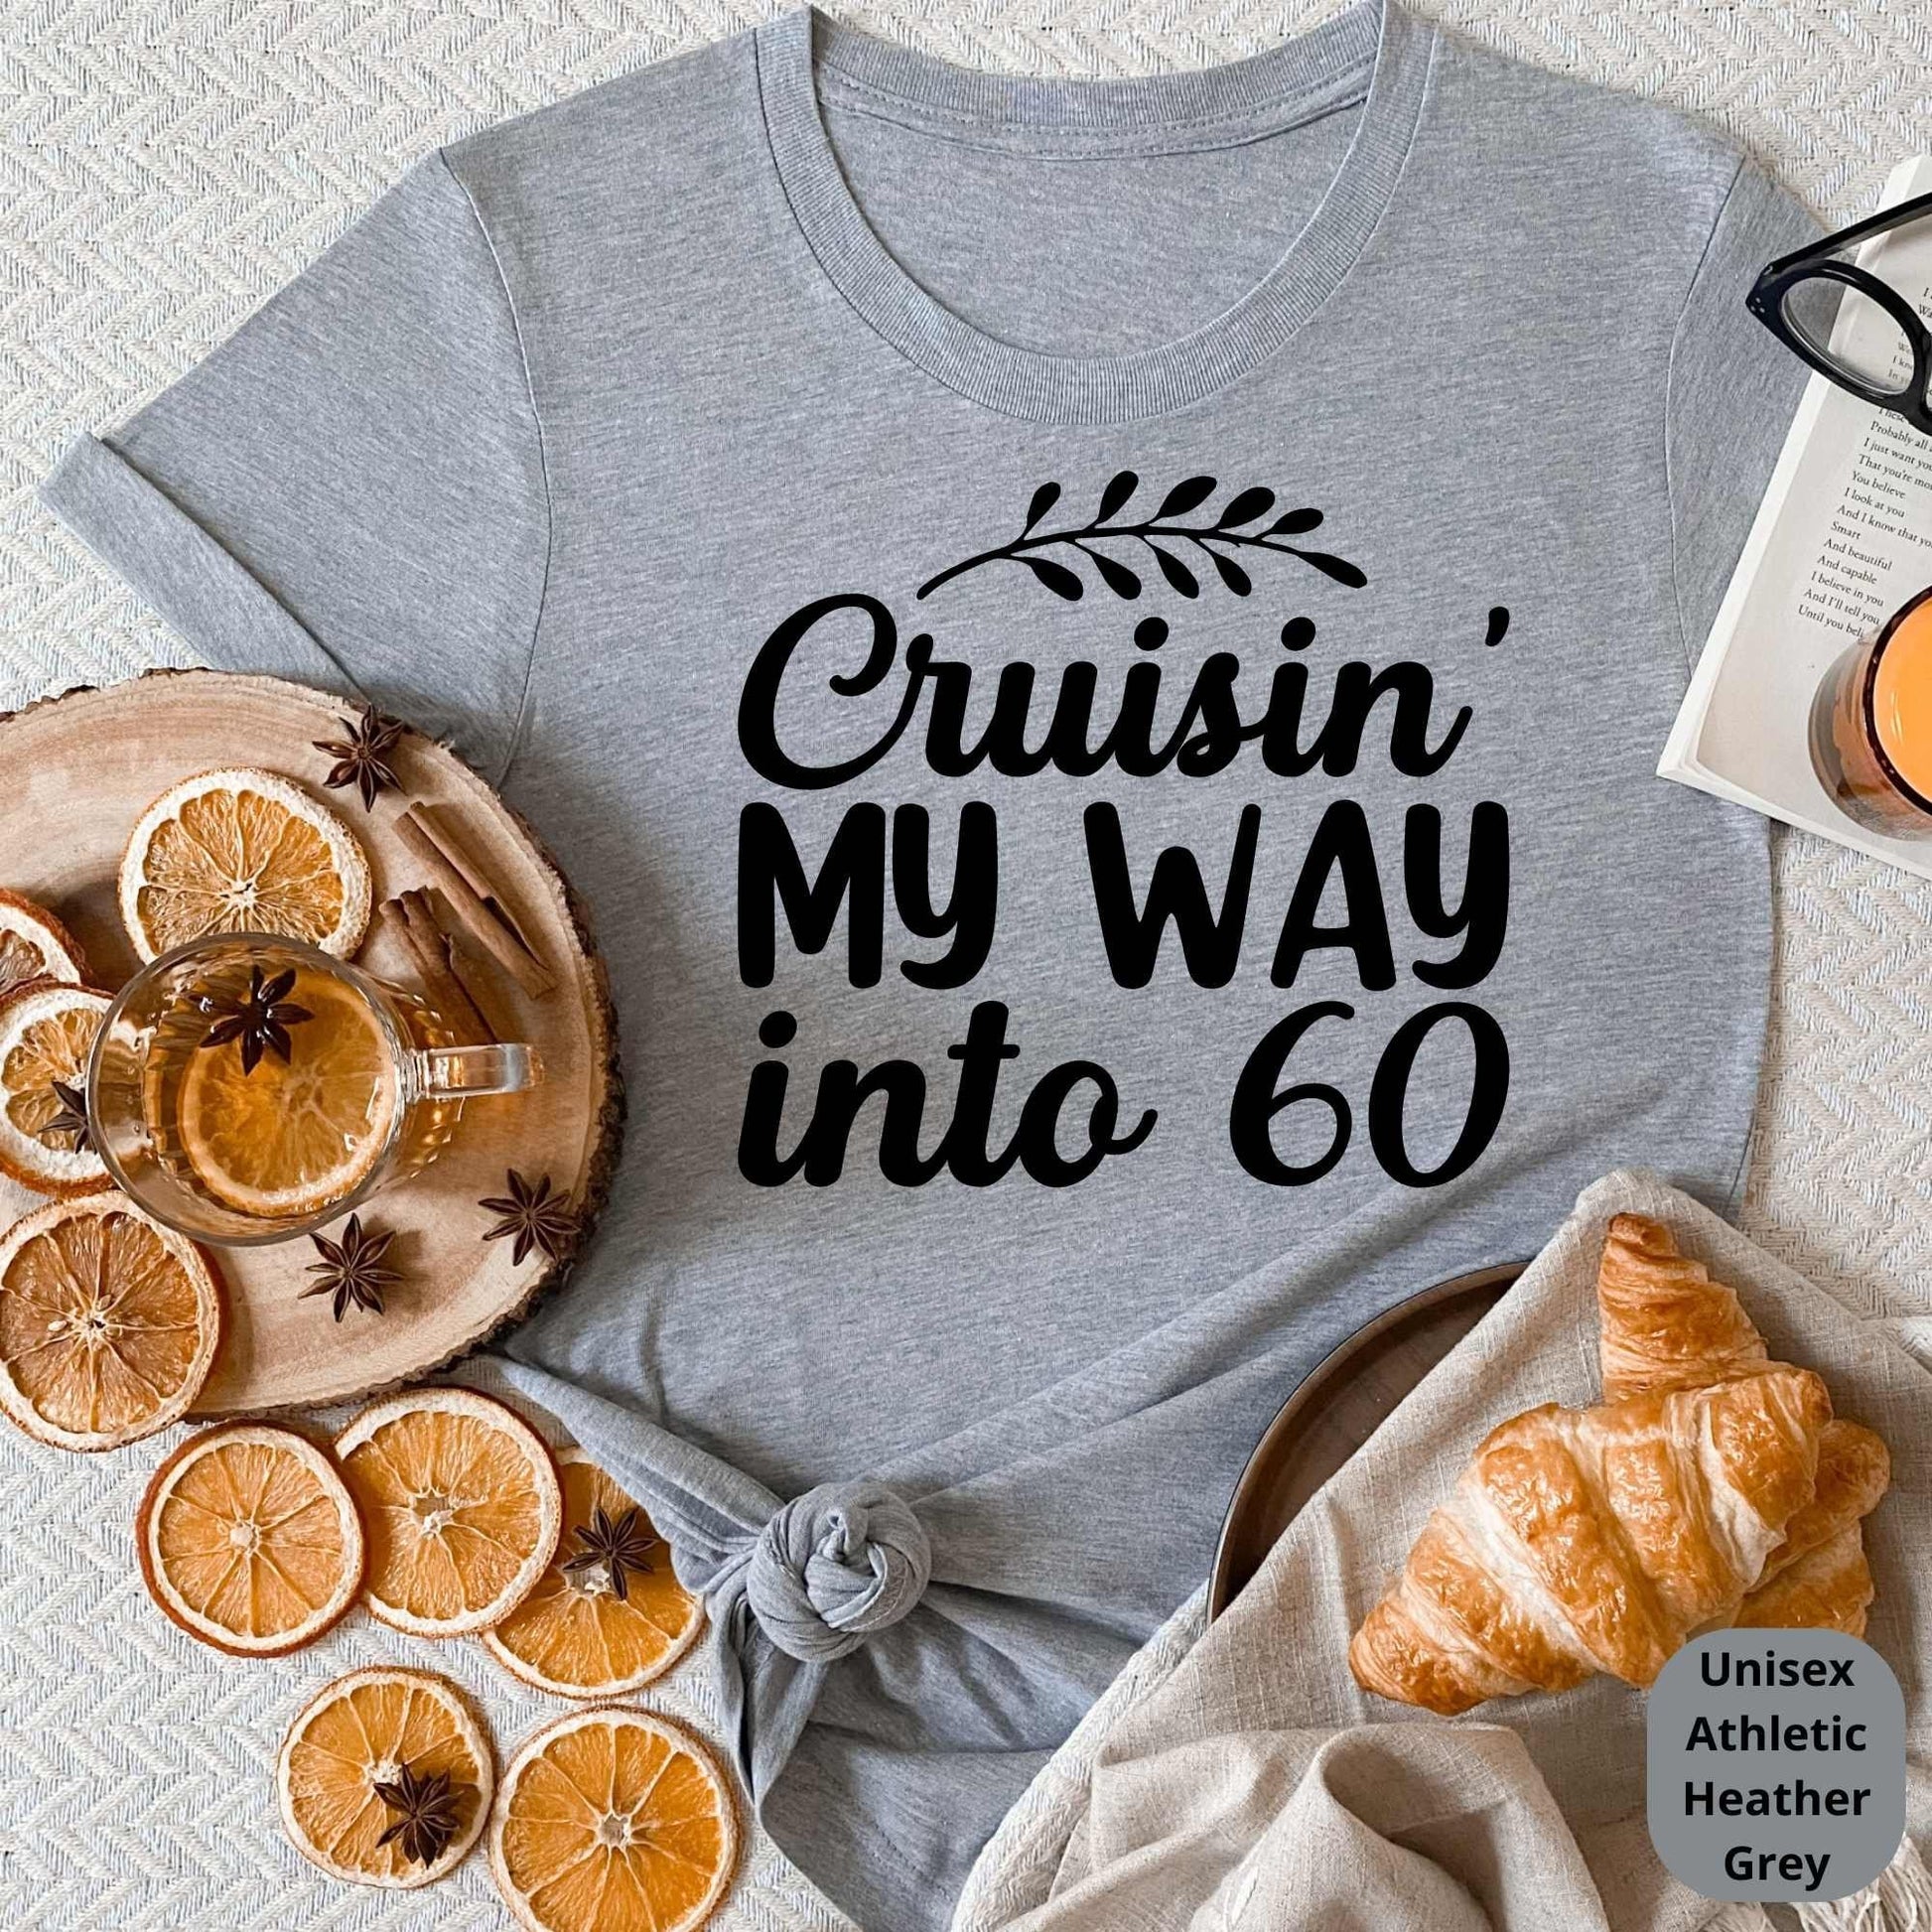 60th Birthday Cruise Shirt, 60th Birthday Gift, Great for Grands, Parents, Aunt, Cousins & Loved Ones Bday Party or Anniversary Celebration